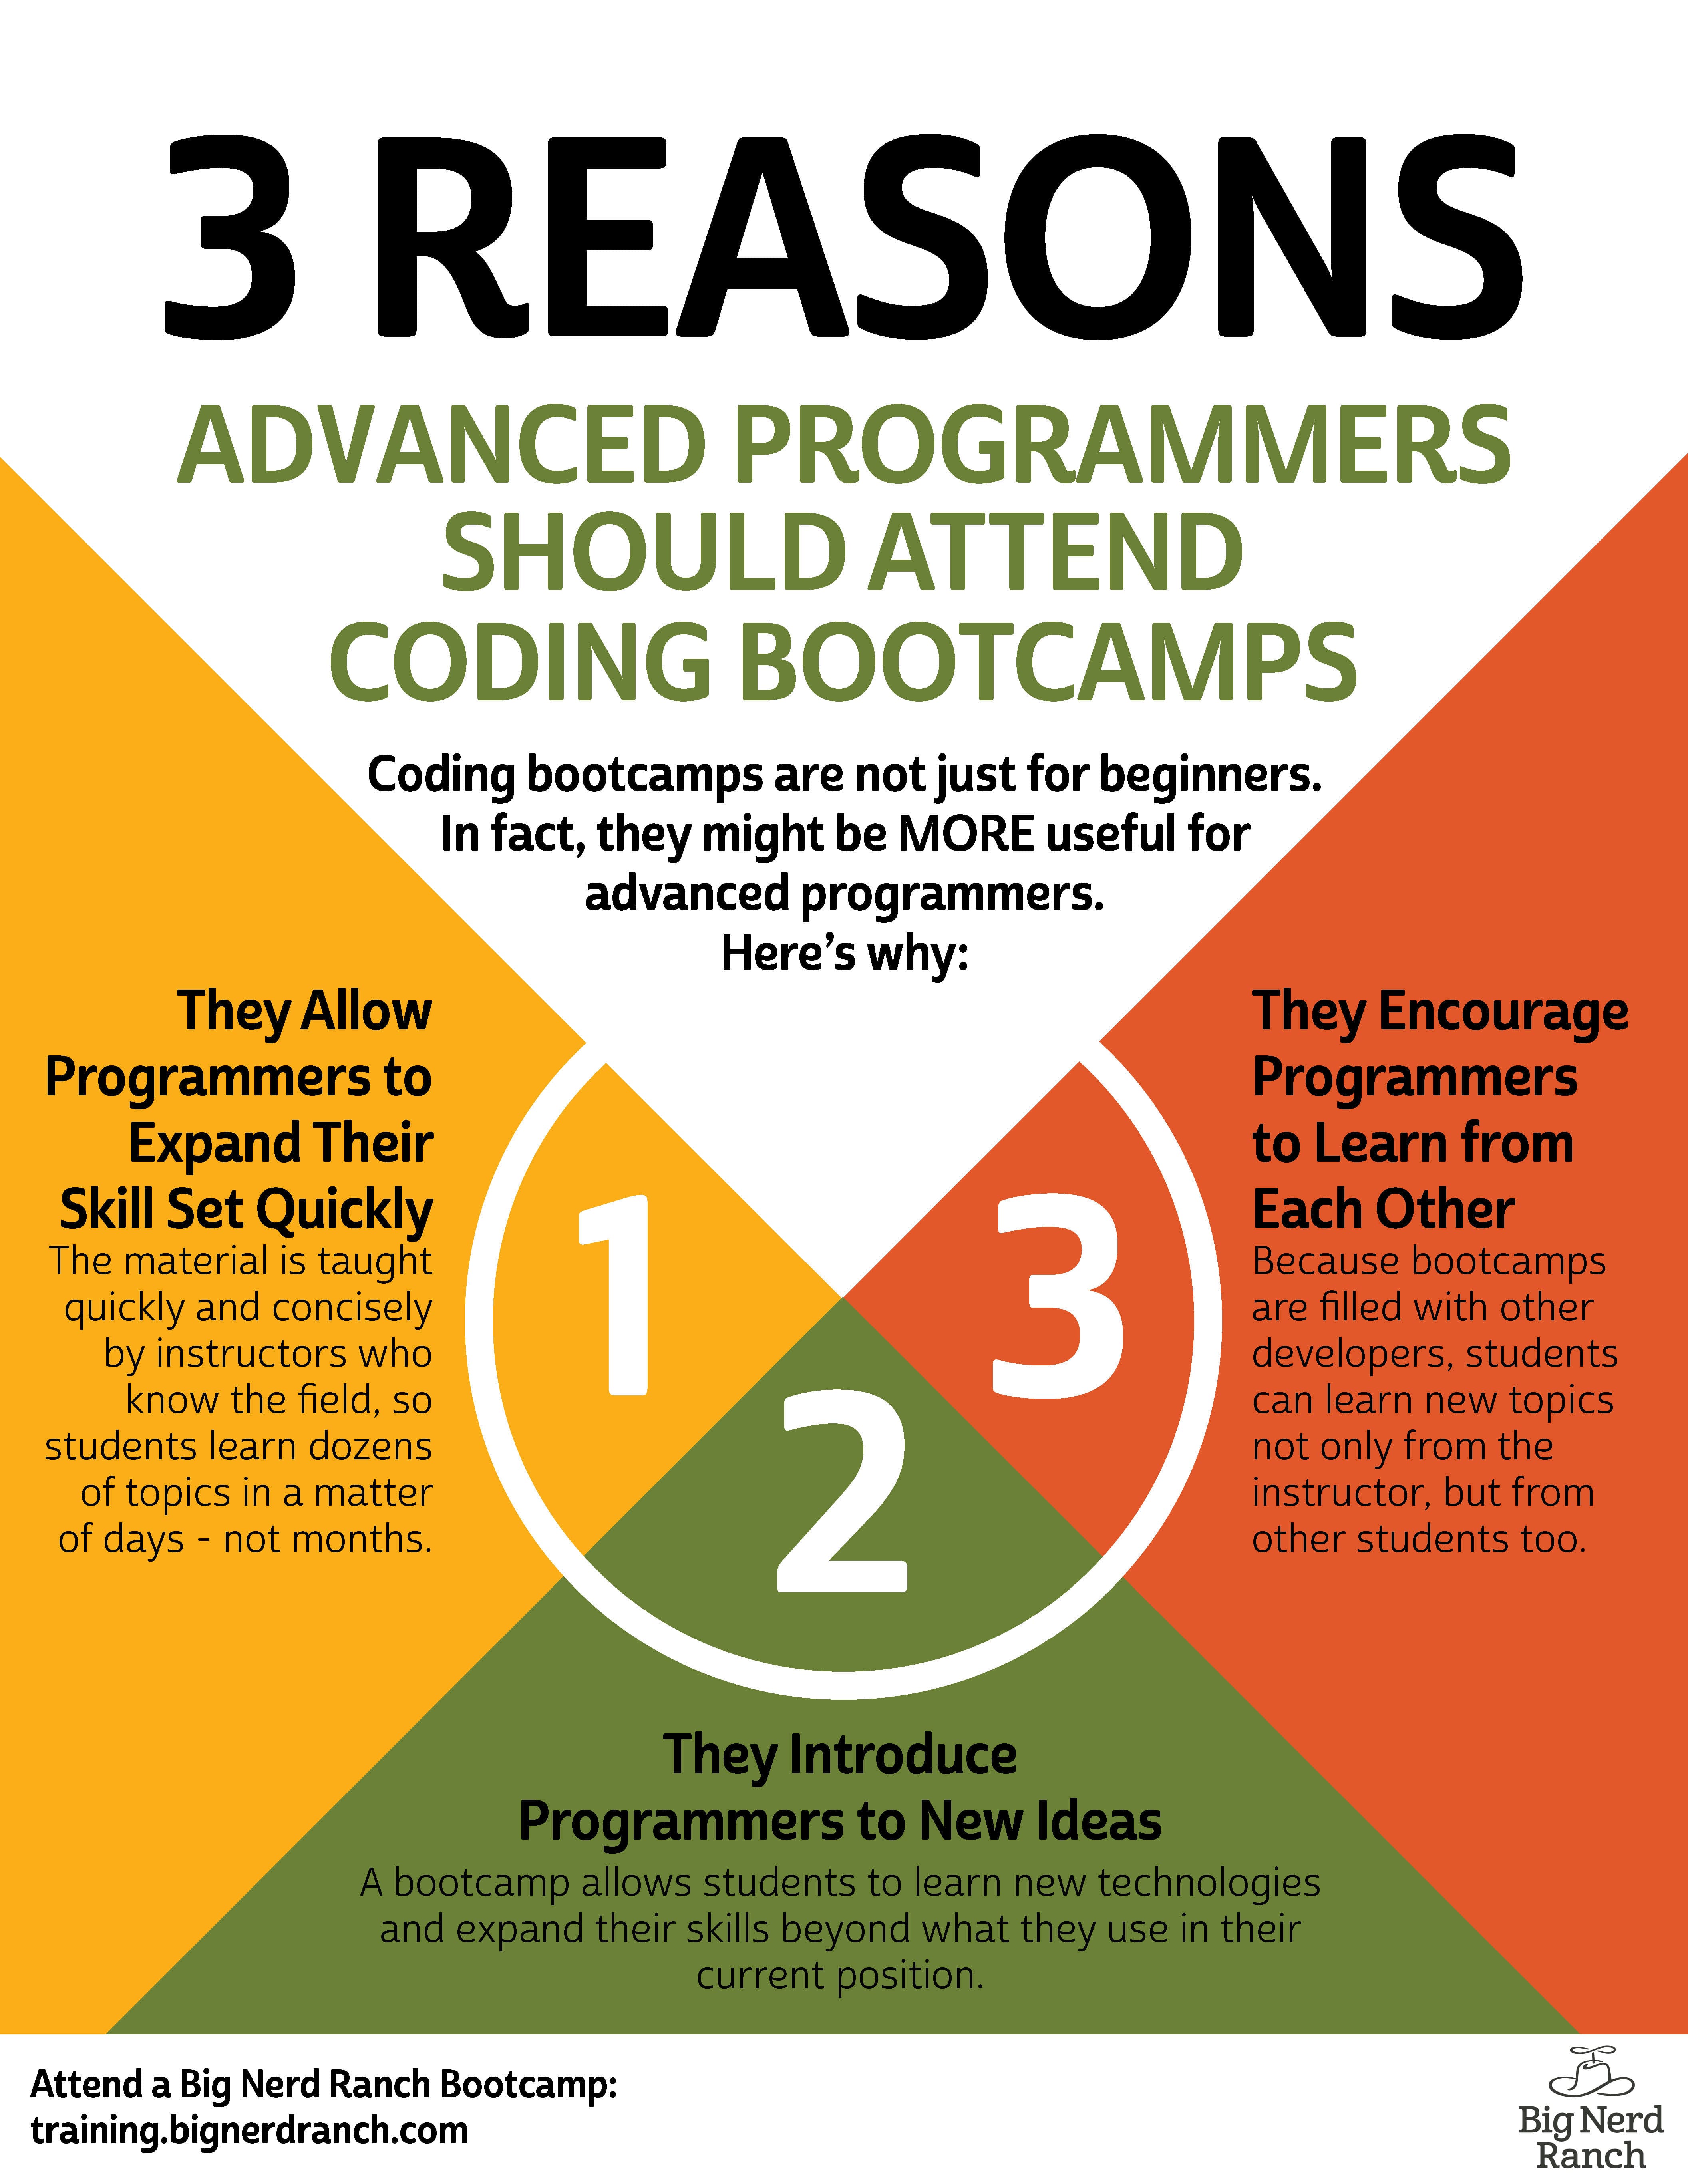 3 reasons why advanced programmers should attend coding bootcamps